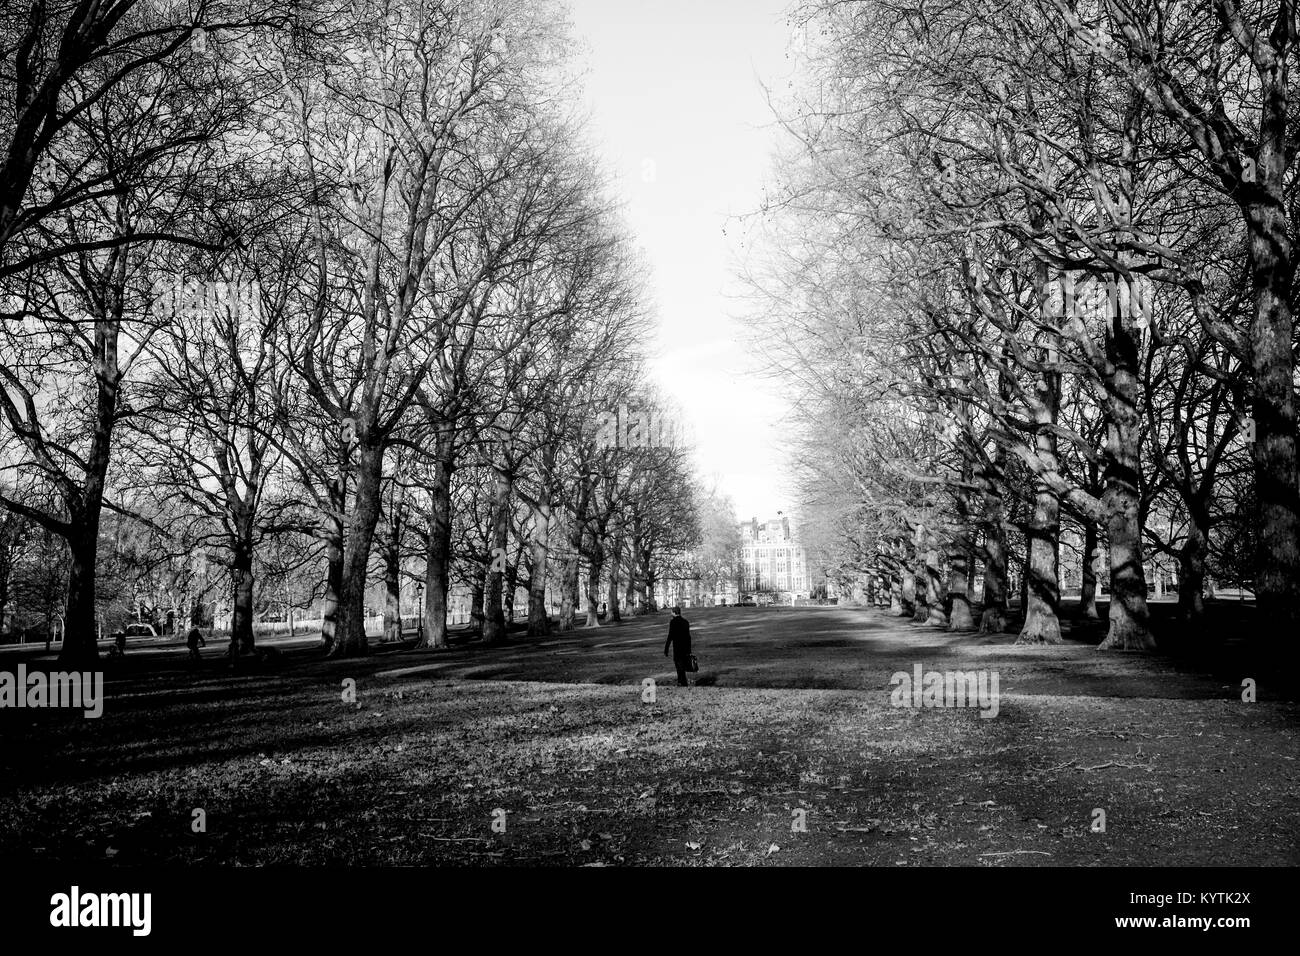 A man walking through Green Park in London during the day Stock Photo